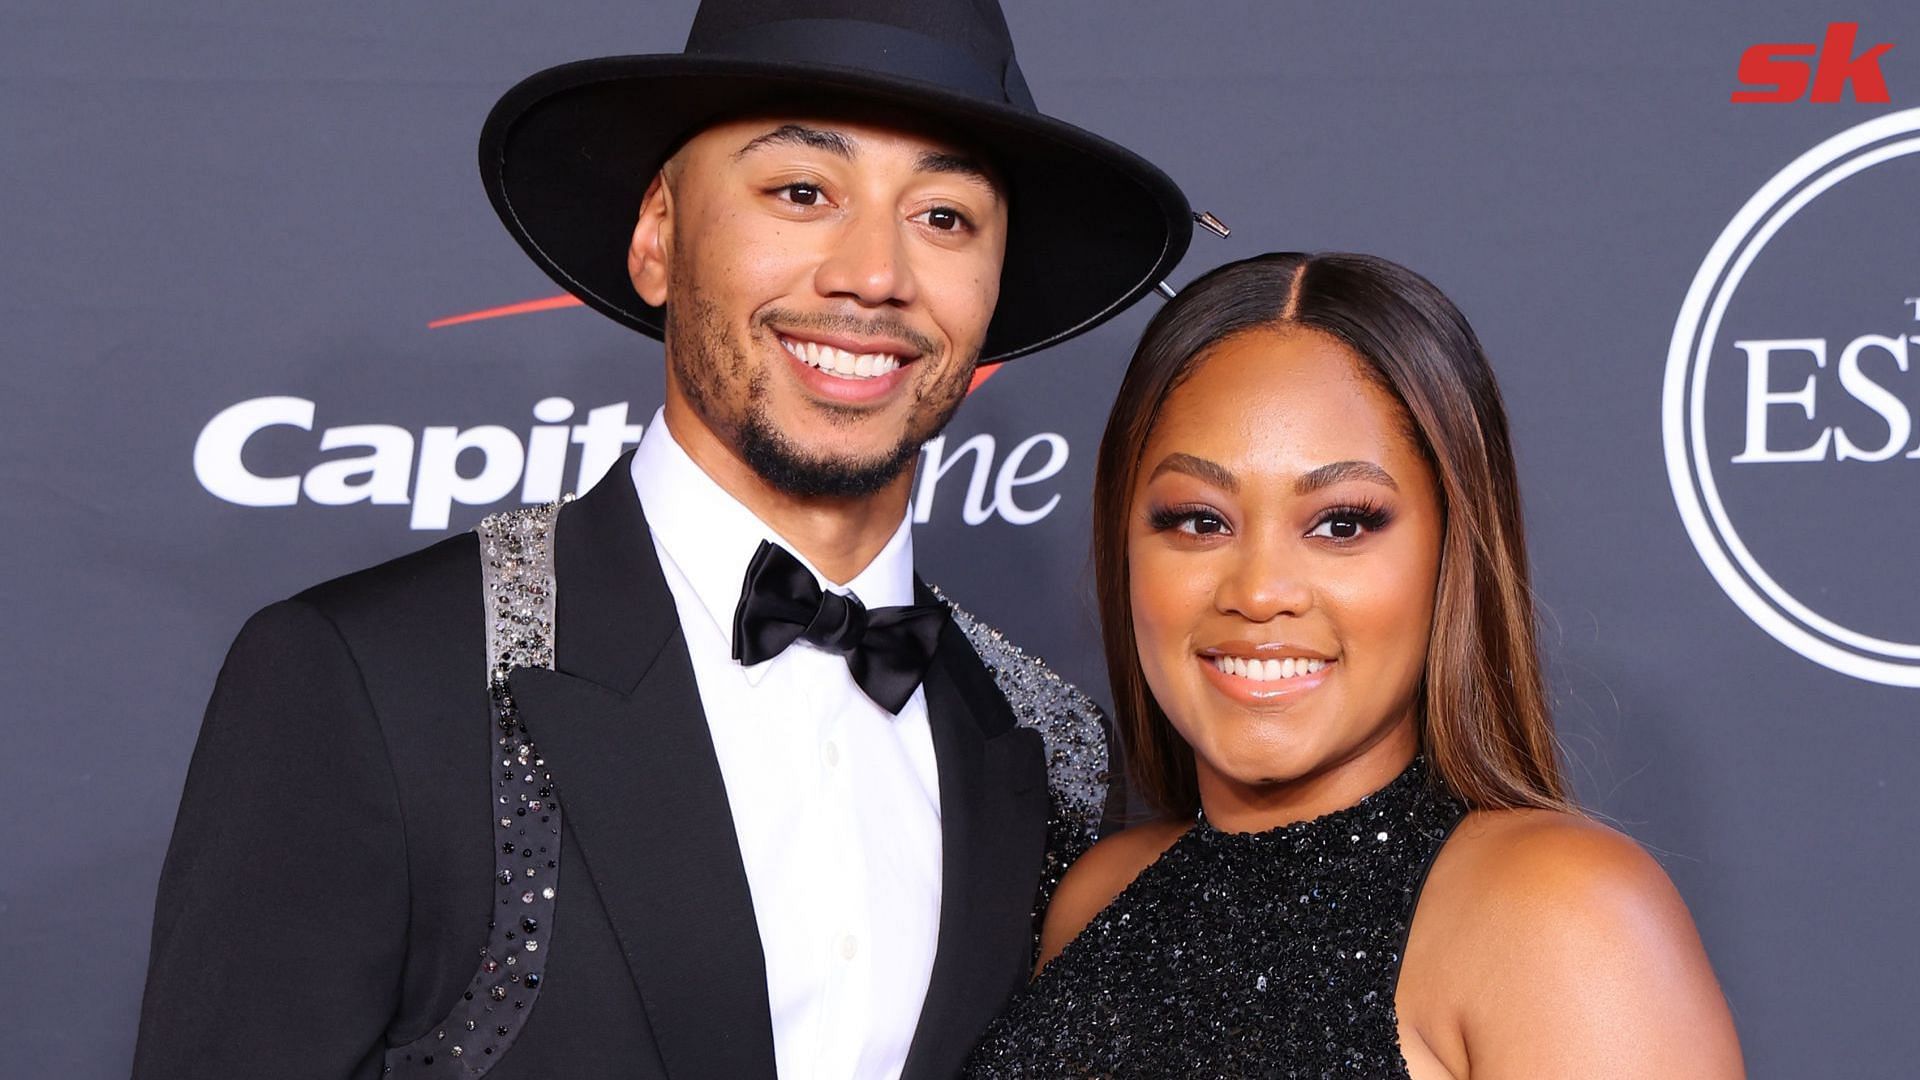 In Photos: LA Dodgers' star Mookie Betts and wife Brianna welcome